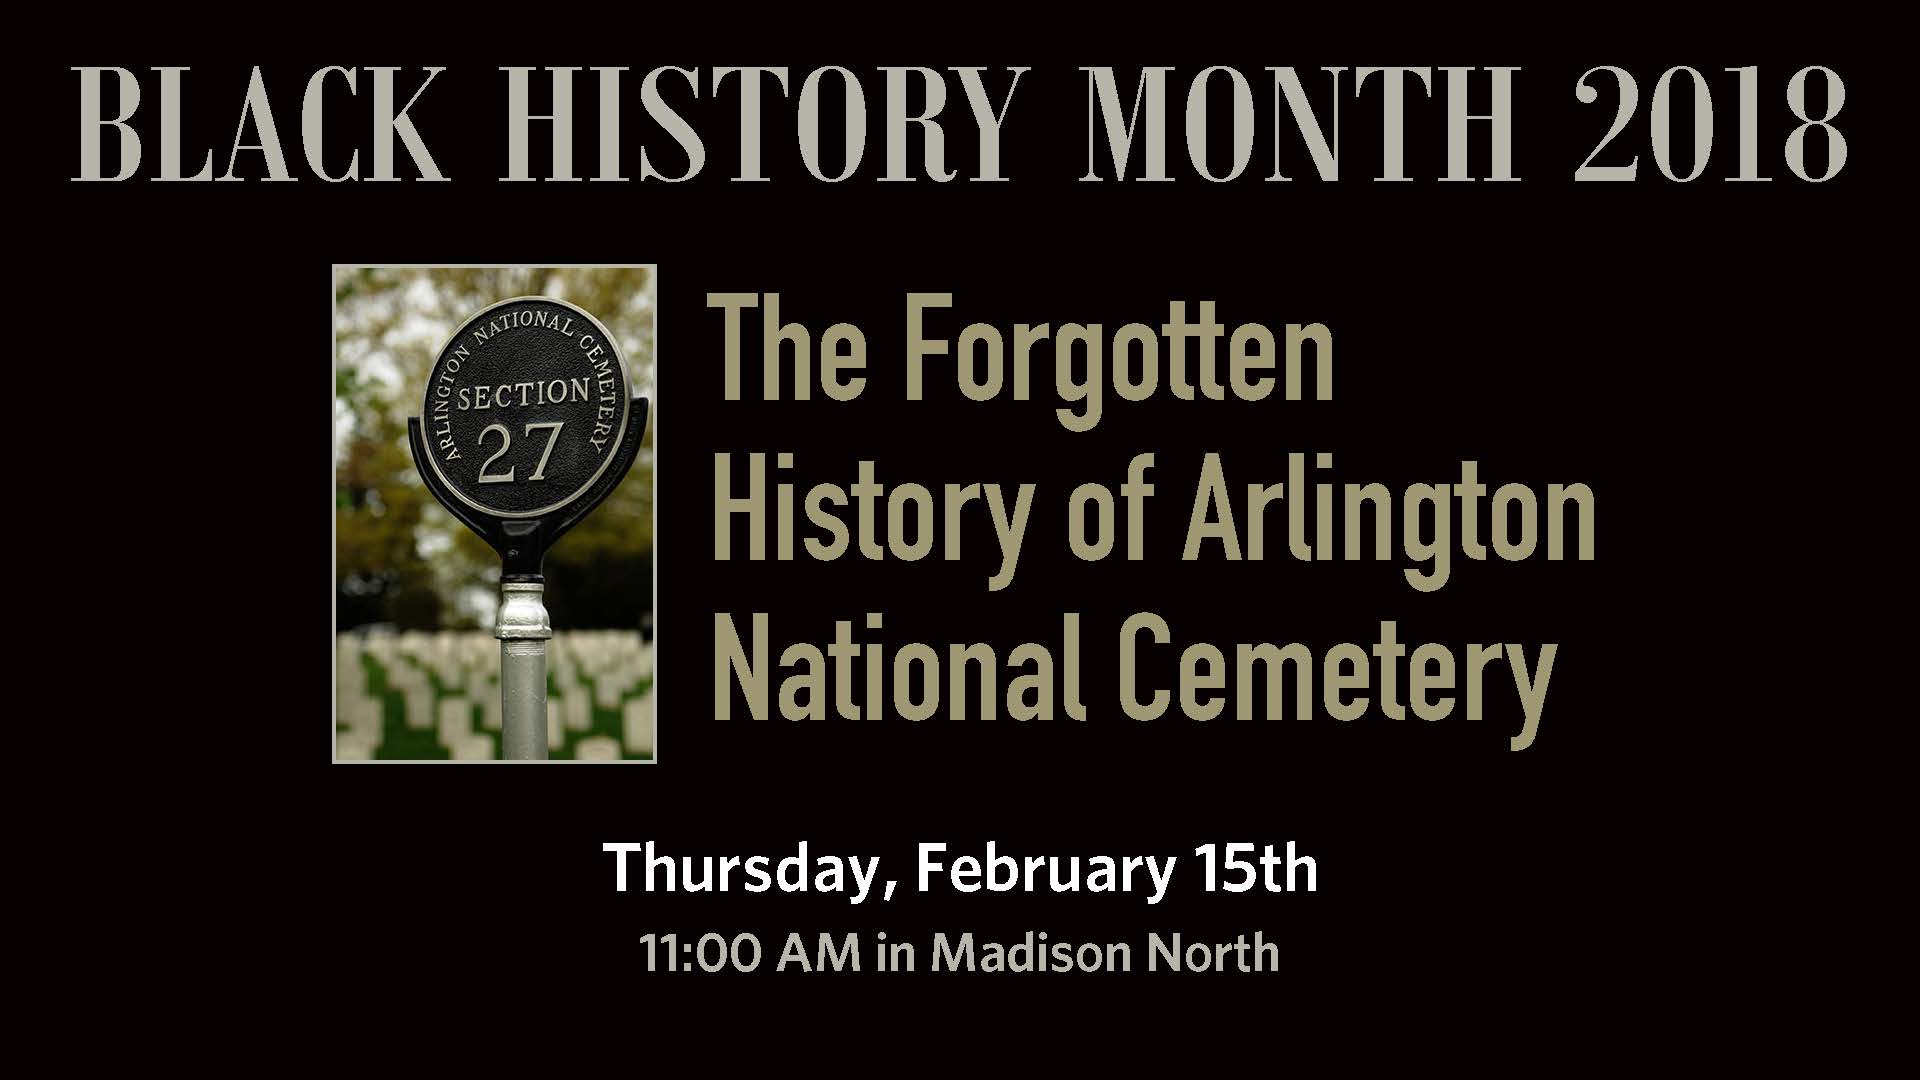 Black History Month Author Meet and Greet: Ric Murphy & Timothy Stephens, Authors of “Section 27 – The Forgotten History of Arlington National Cemetery”